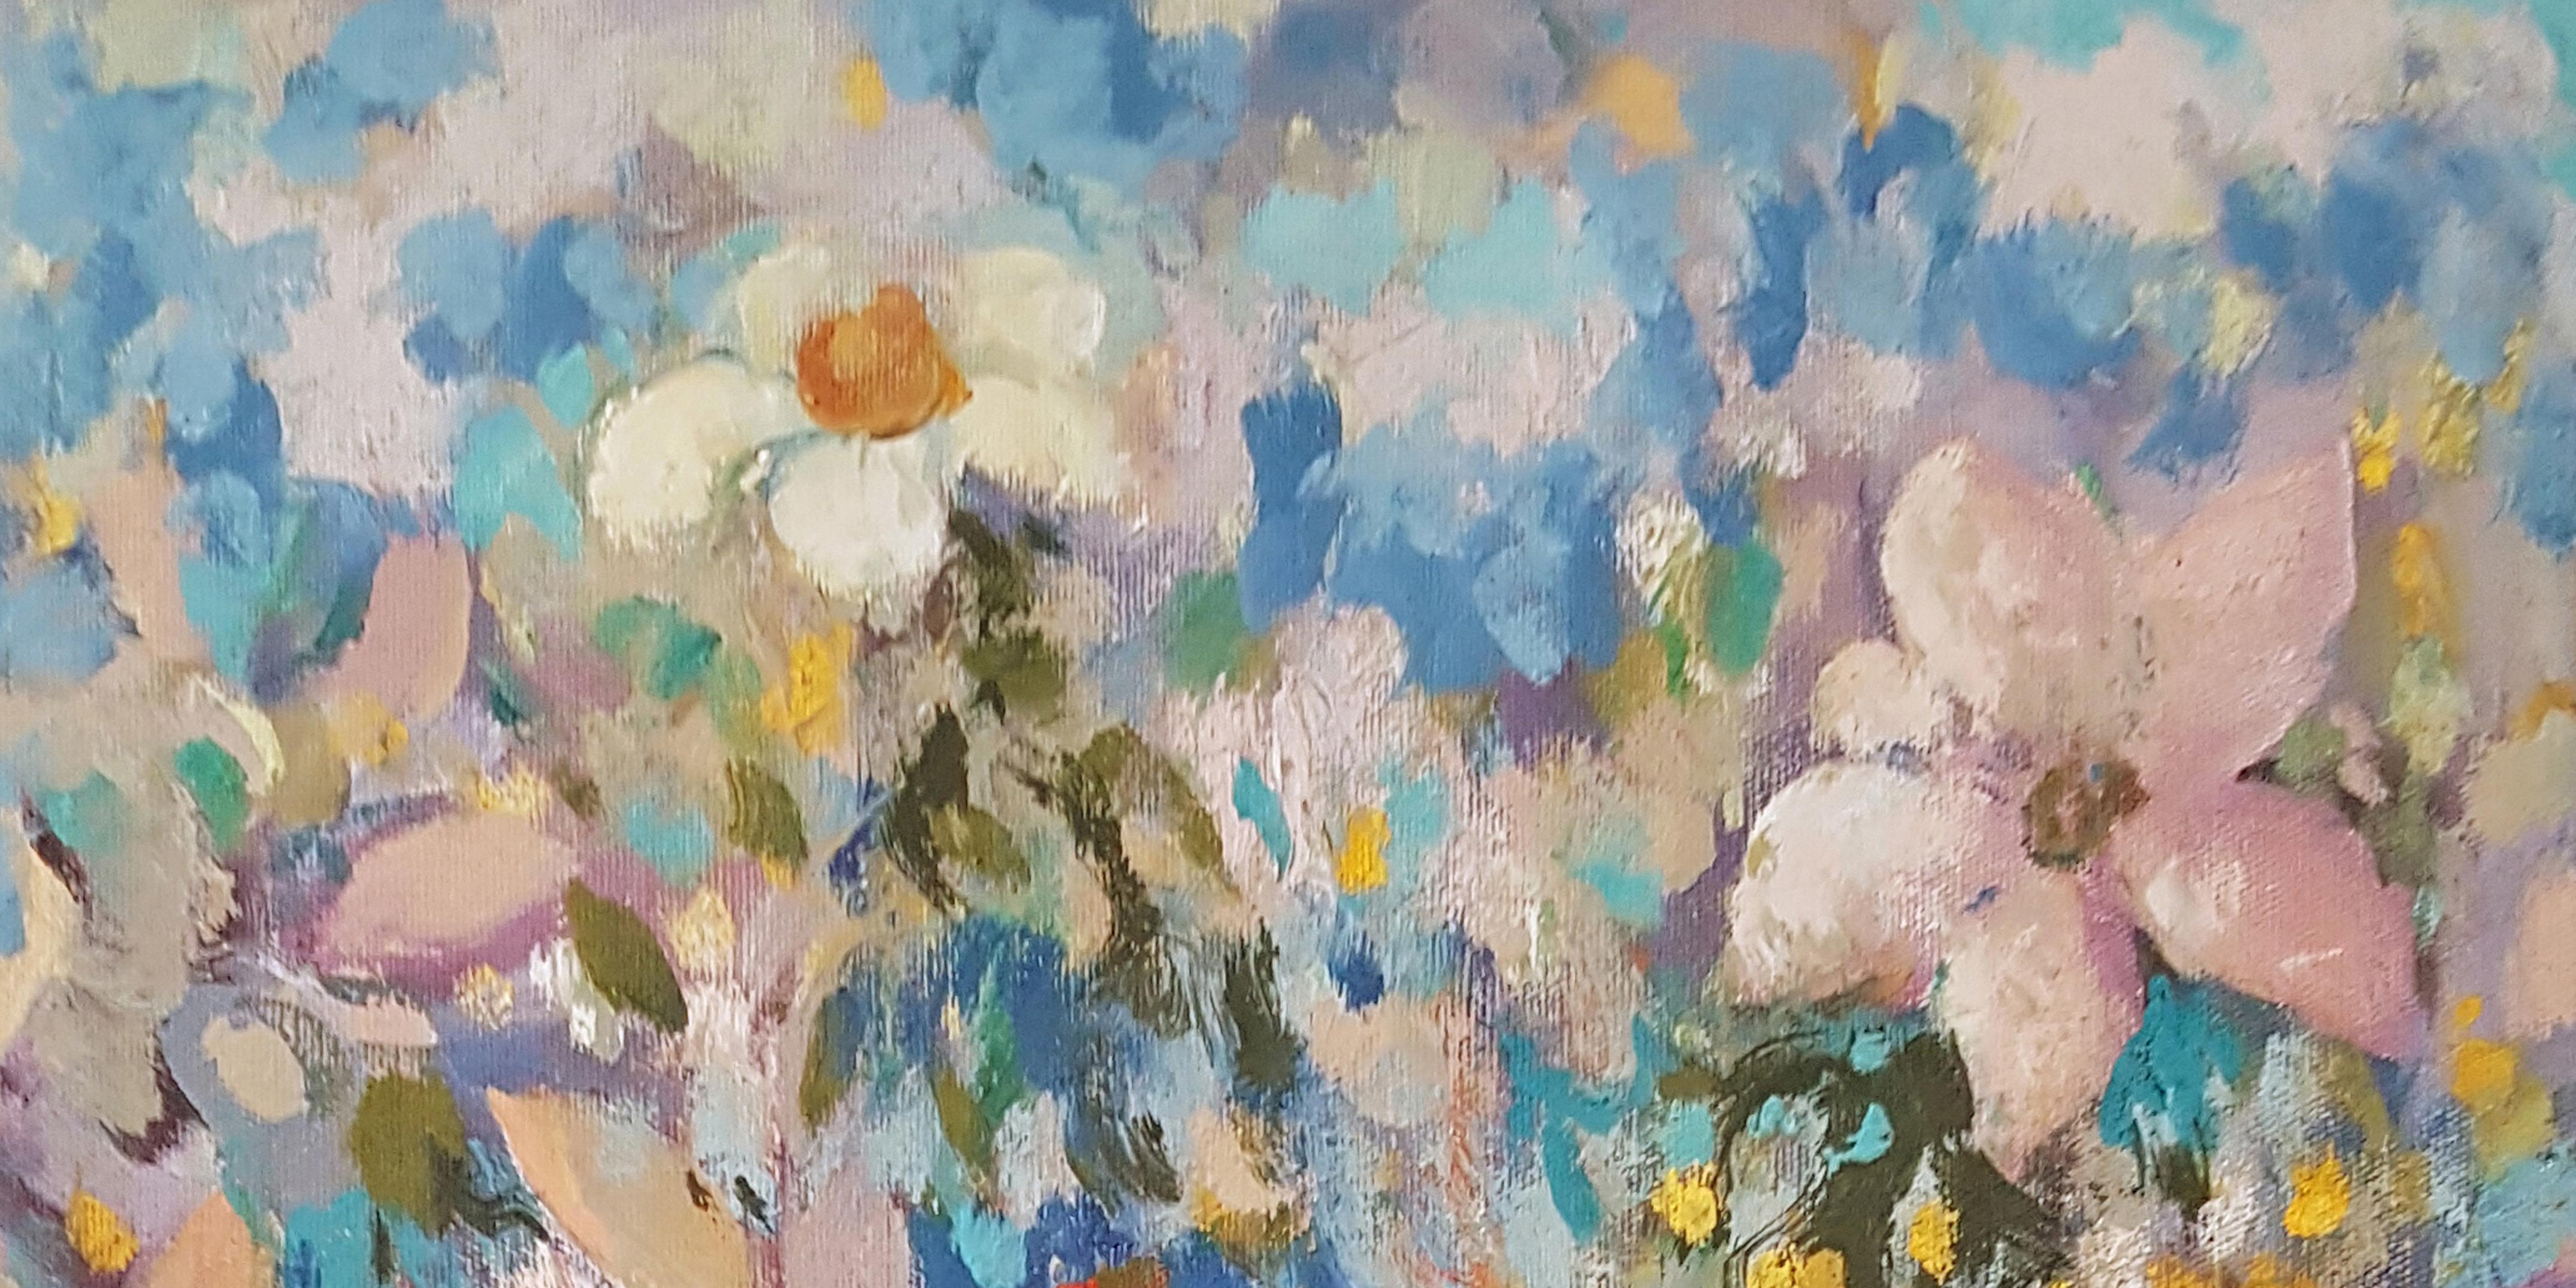 Wild Flowers, Impressionism, Original Oil Painting, One of a Kind - Gray Landscape Painting by Ara H. Hakobyan